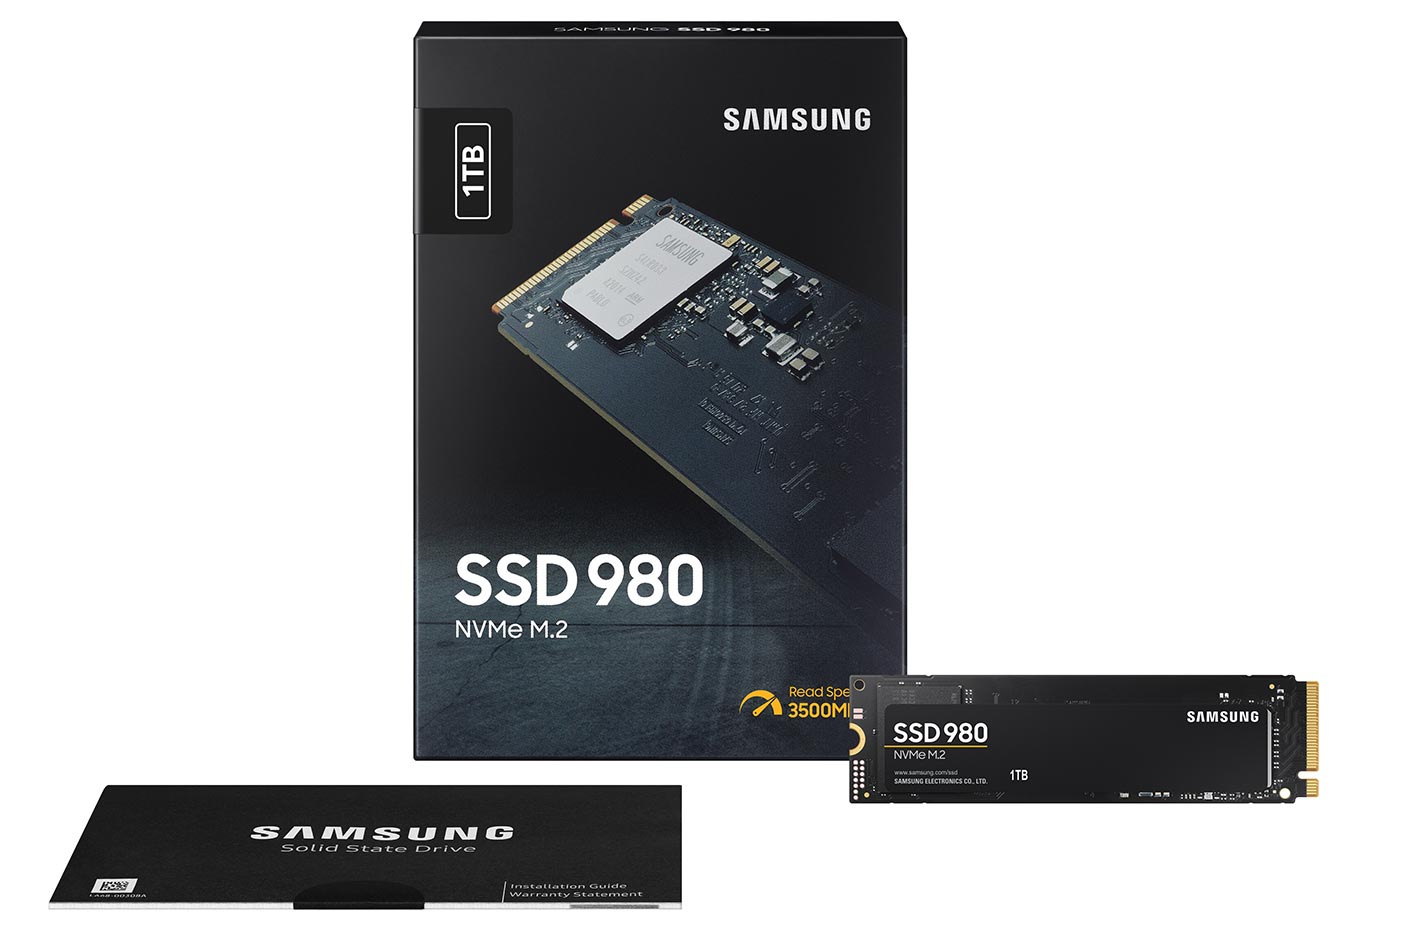 Samsung 980 NVMe SSD offers speed at an affordable price